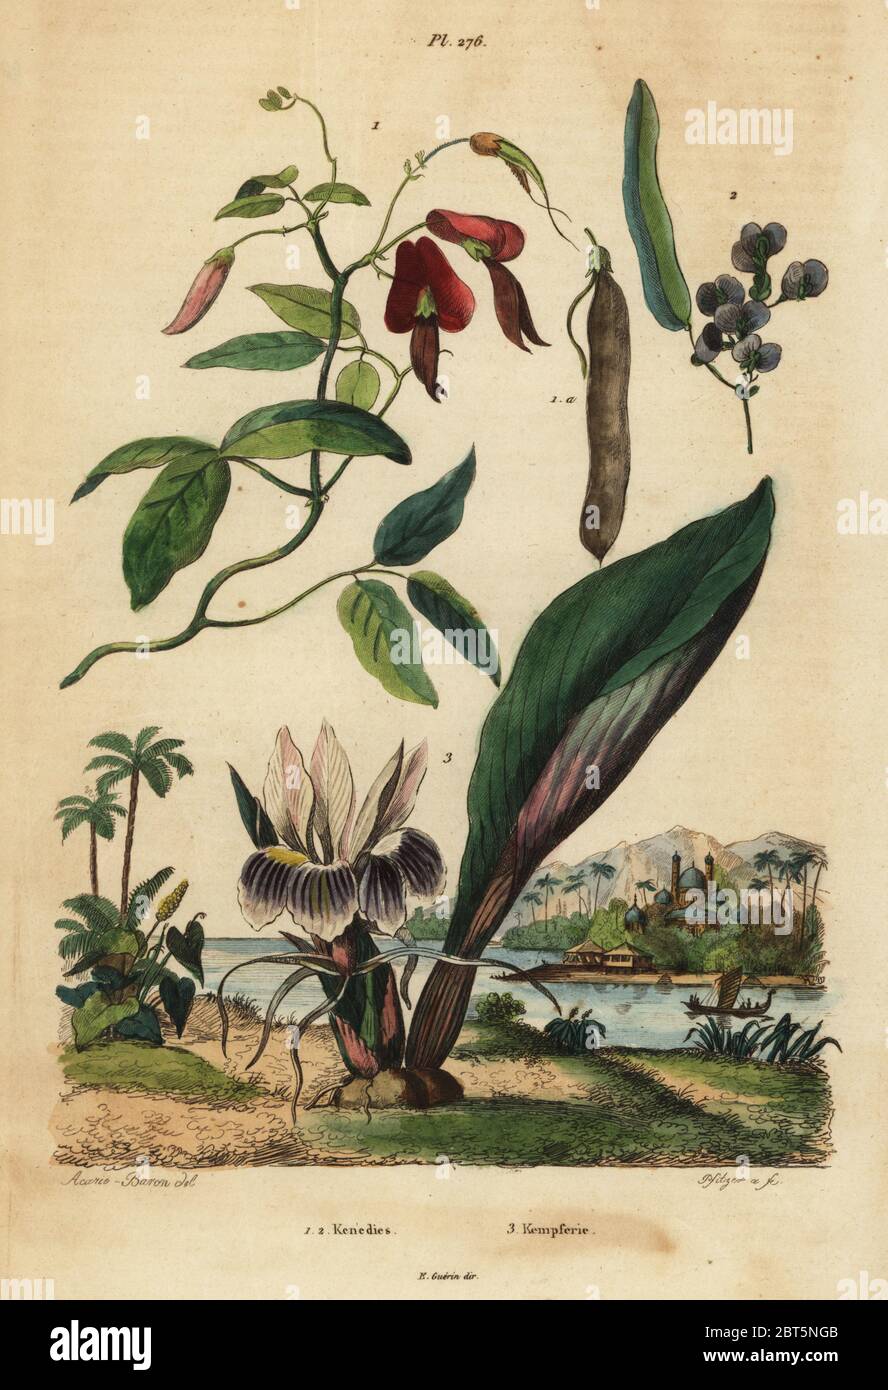 Dusky coral pea, Kennedia rubicunda 1, false sarsaparilla, Hardenbergia violacea 2, and blackhorm., Kaempferia rotunda 3. Kenedies, Kempferie. Handcoloured steel engraving by Pfitzer after an illustration by A. Carie Baron from Felix-Edouard Guerin-Meneville's Dictionnaire Pittoresque d'Histoire Naturelle (Picturesque Dictionary of Natural History), Paris, 1834-39. Stock Photo